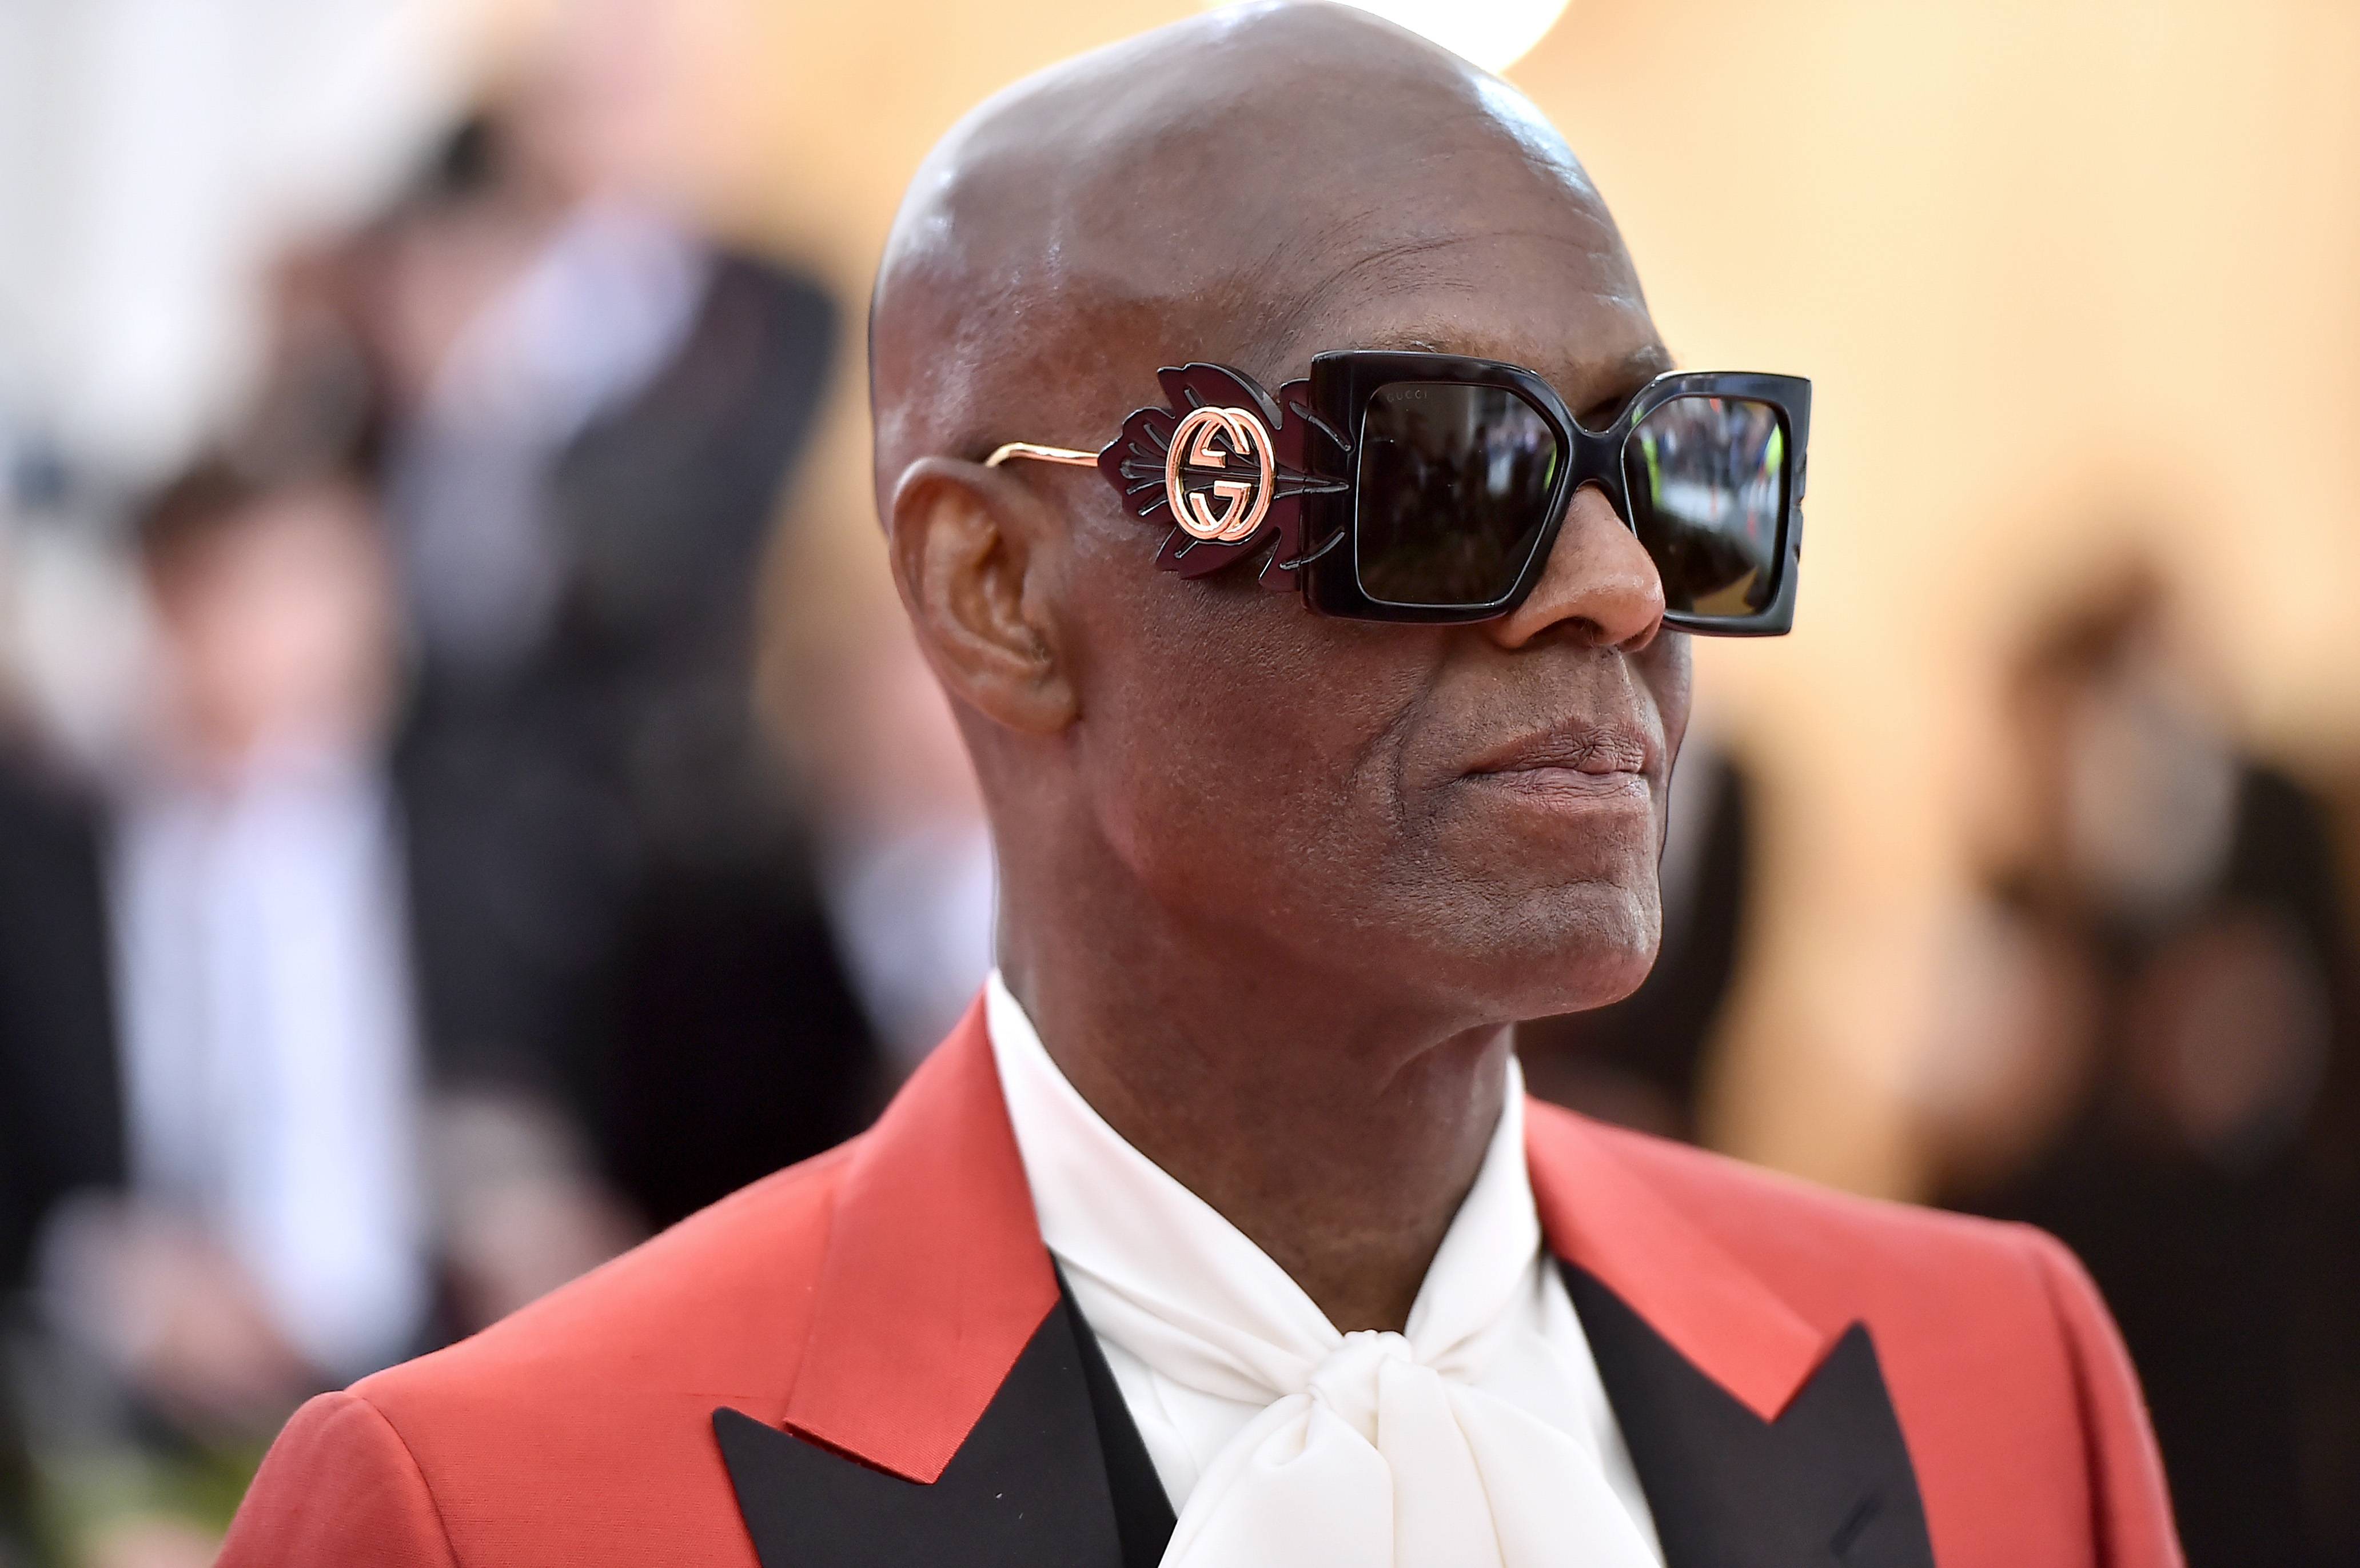 Dapper Dan The Man Behind Some Of Hip Hop's Hottest Looks—See His Most